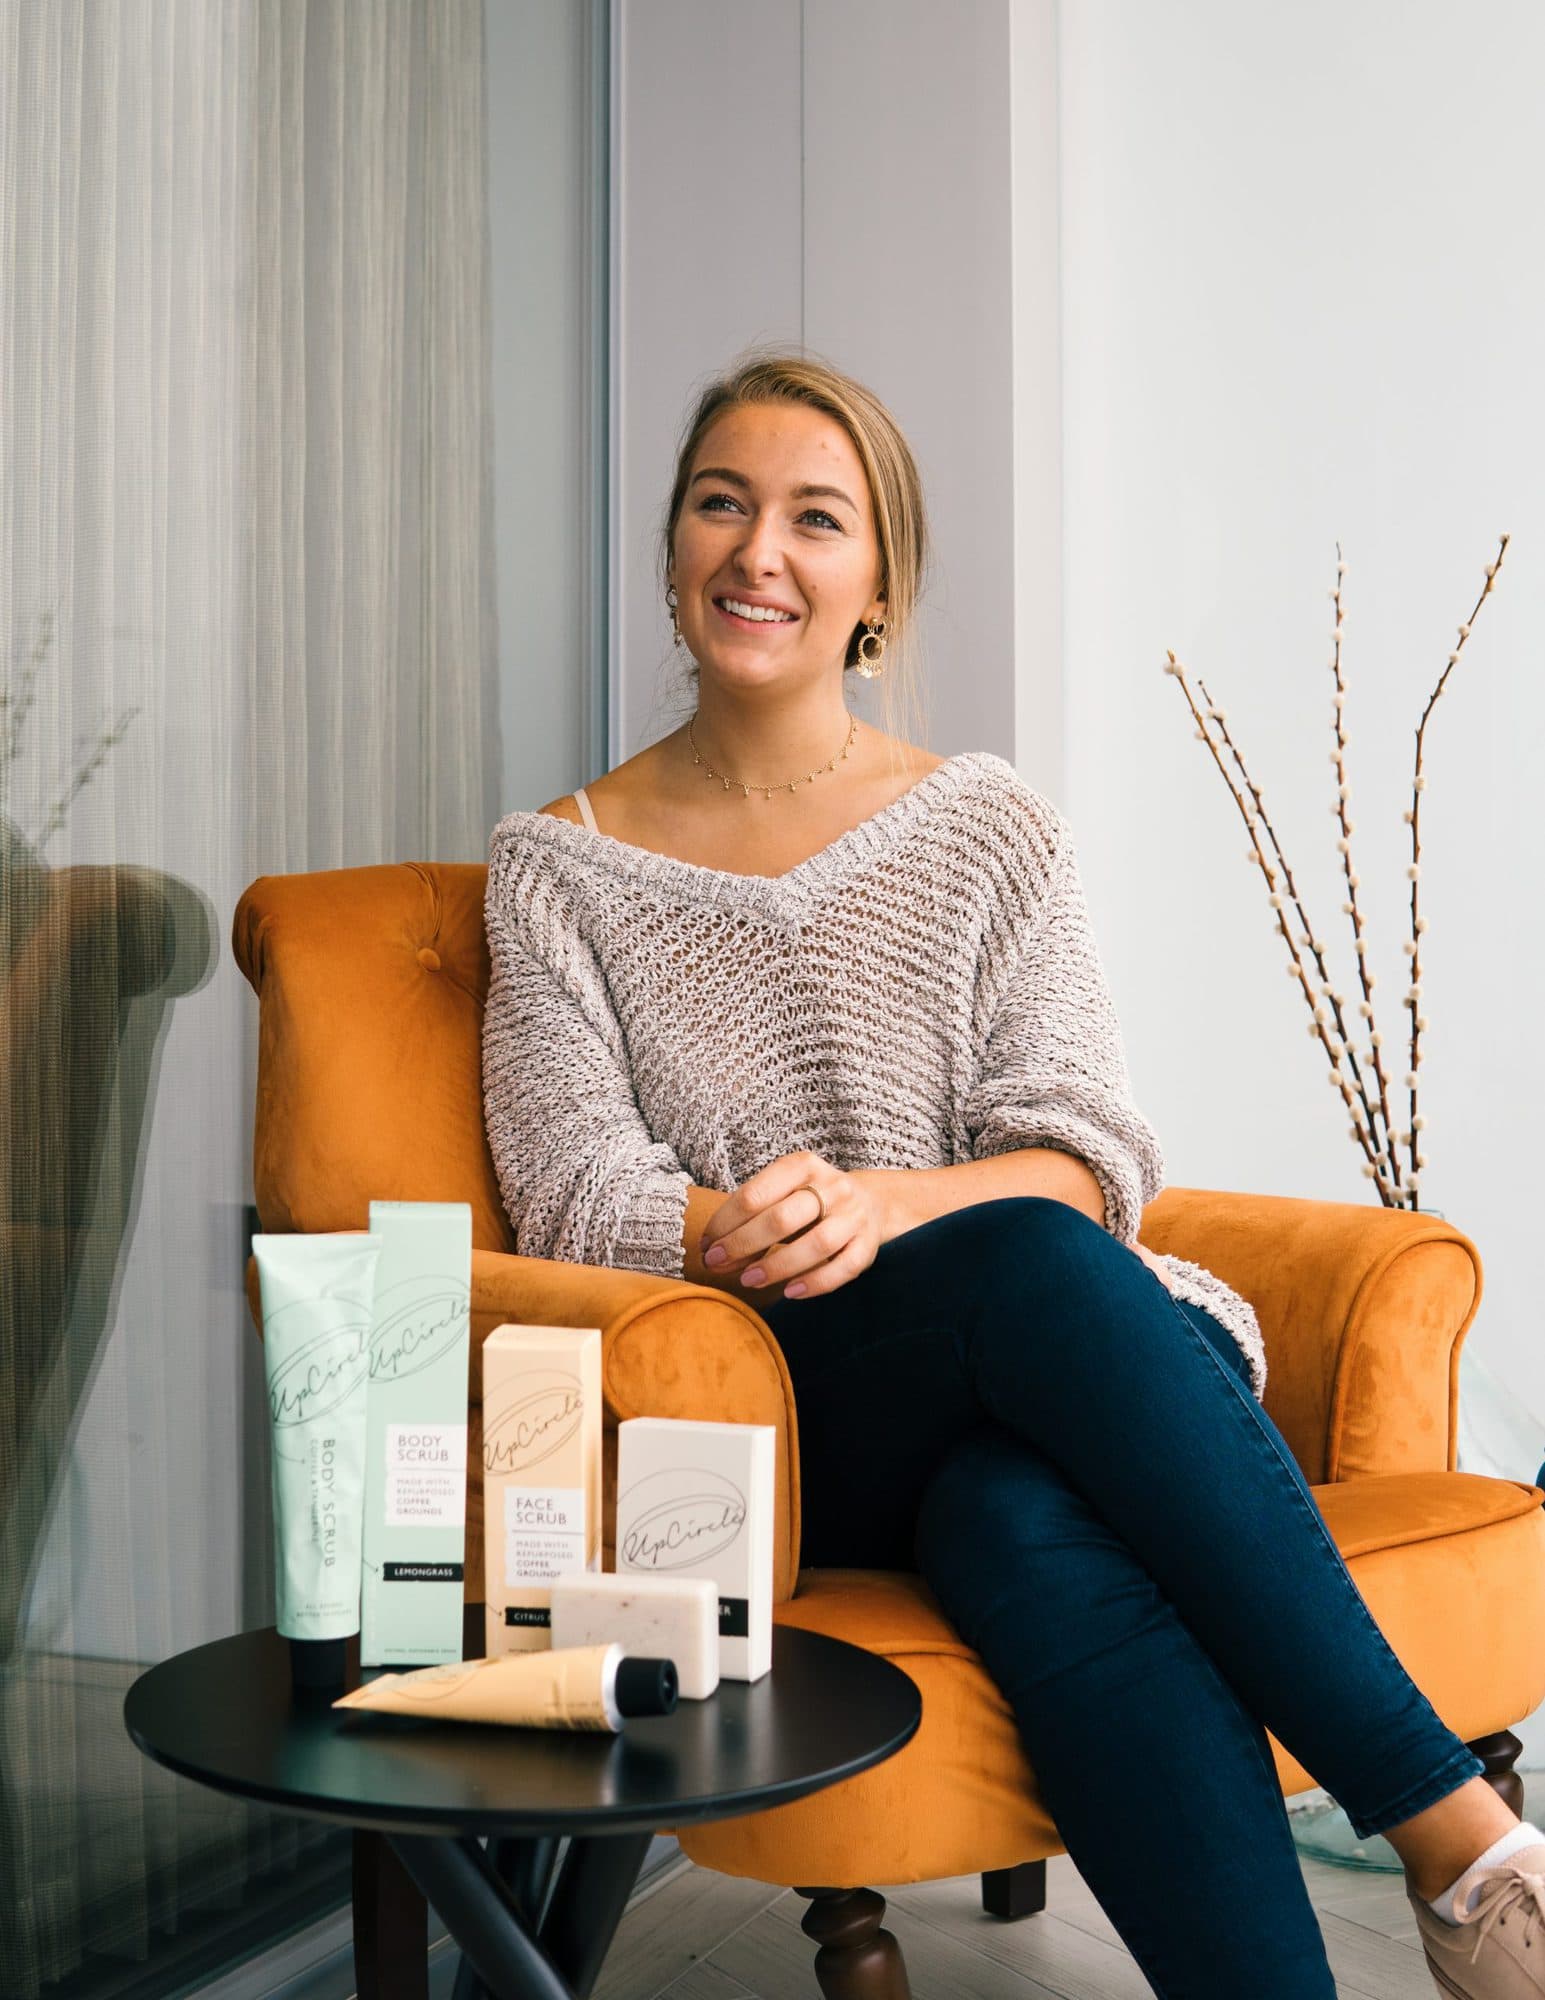 Anna Brightman, Co-founder of UpCircle beauty sits in an orange arm chair with a selection of UpCircle products on the round black table in the foreground